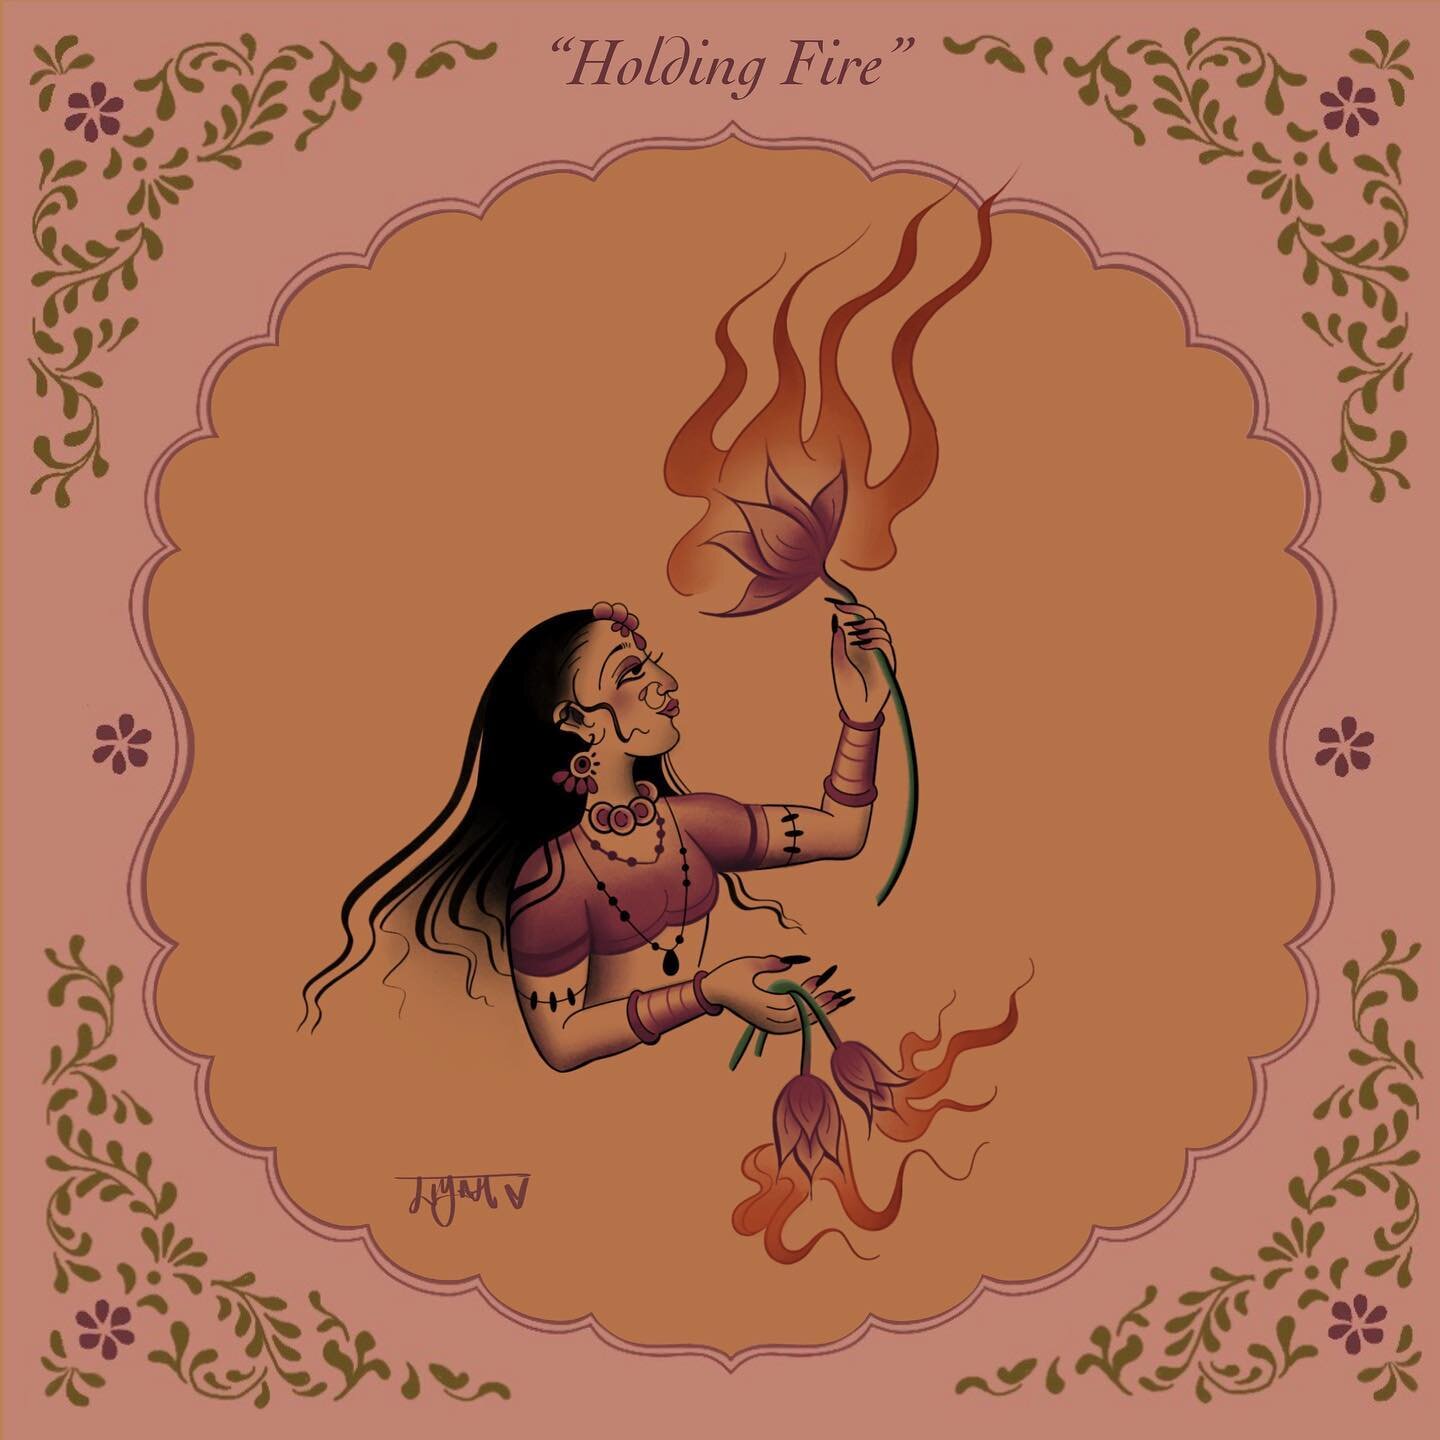 &ldquo;holding fire&rdquo; 🪷 flash 

Spring is finally coming,
and I&rsquo;m feeling hopeful 🌷
In spring we can take off our armour and soften to the earth again 🌸

In the worlds within Rajasthani paintings, it always looks like spring&hellip;

Ho